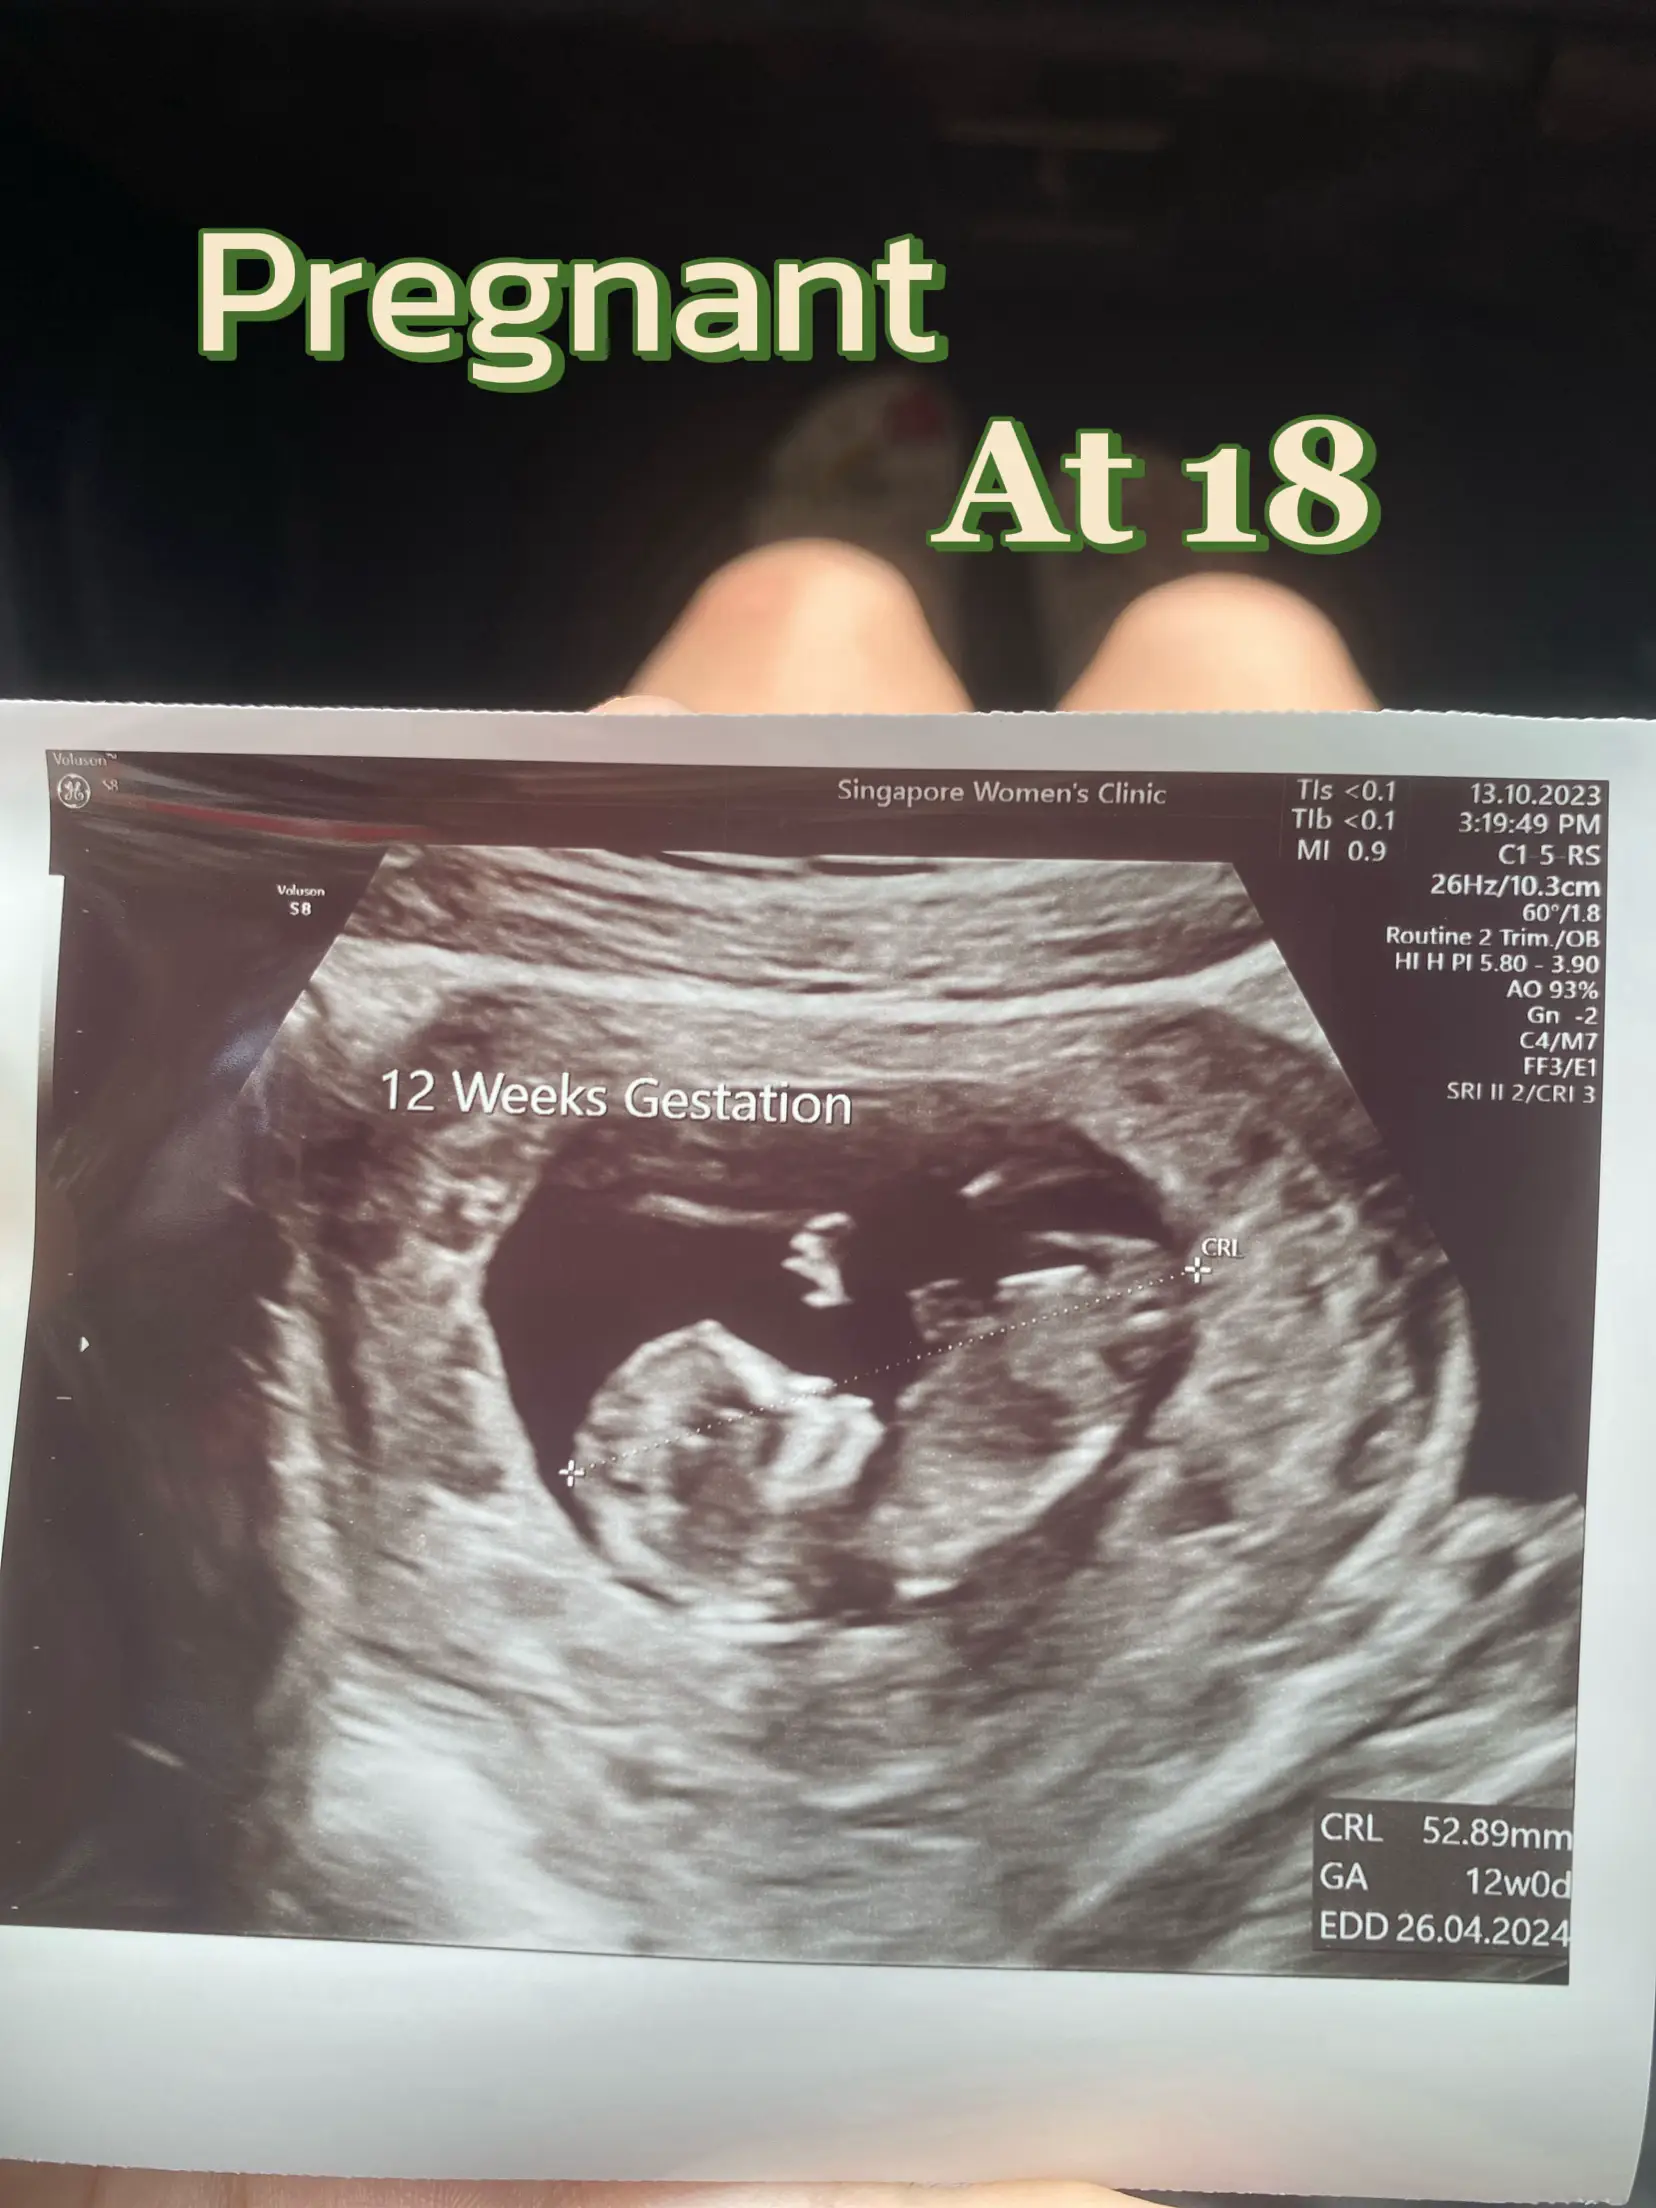 Pregnant at 18?!?'s images(0)